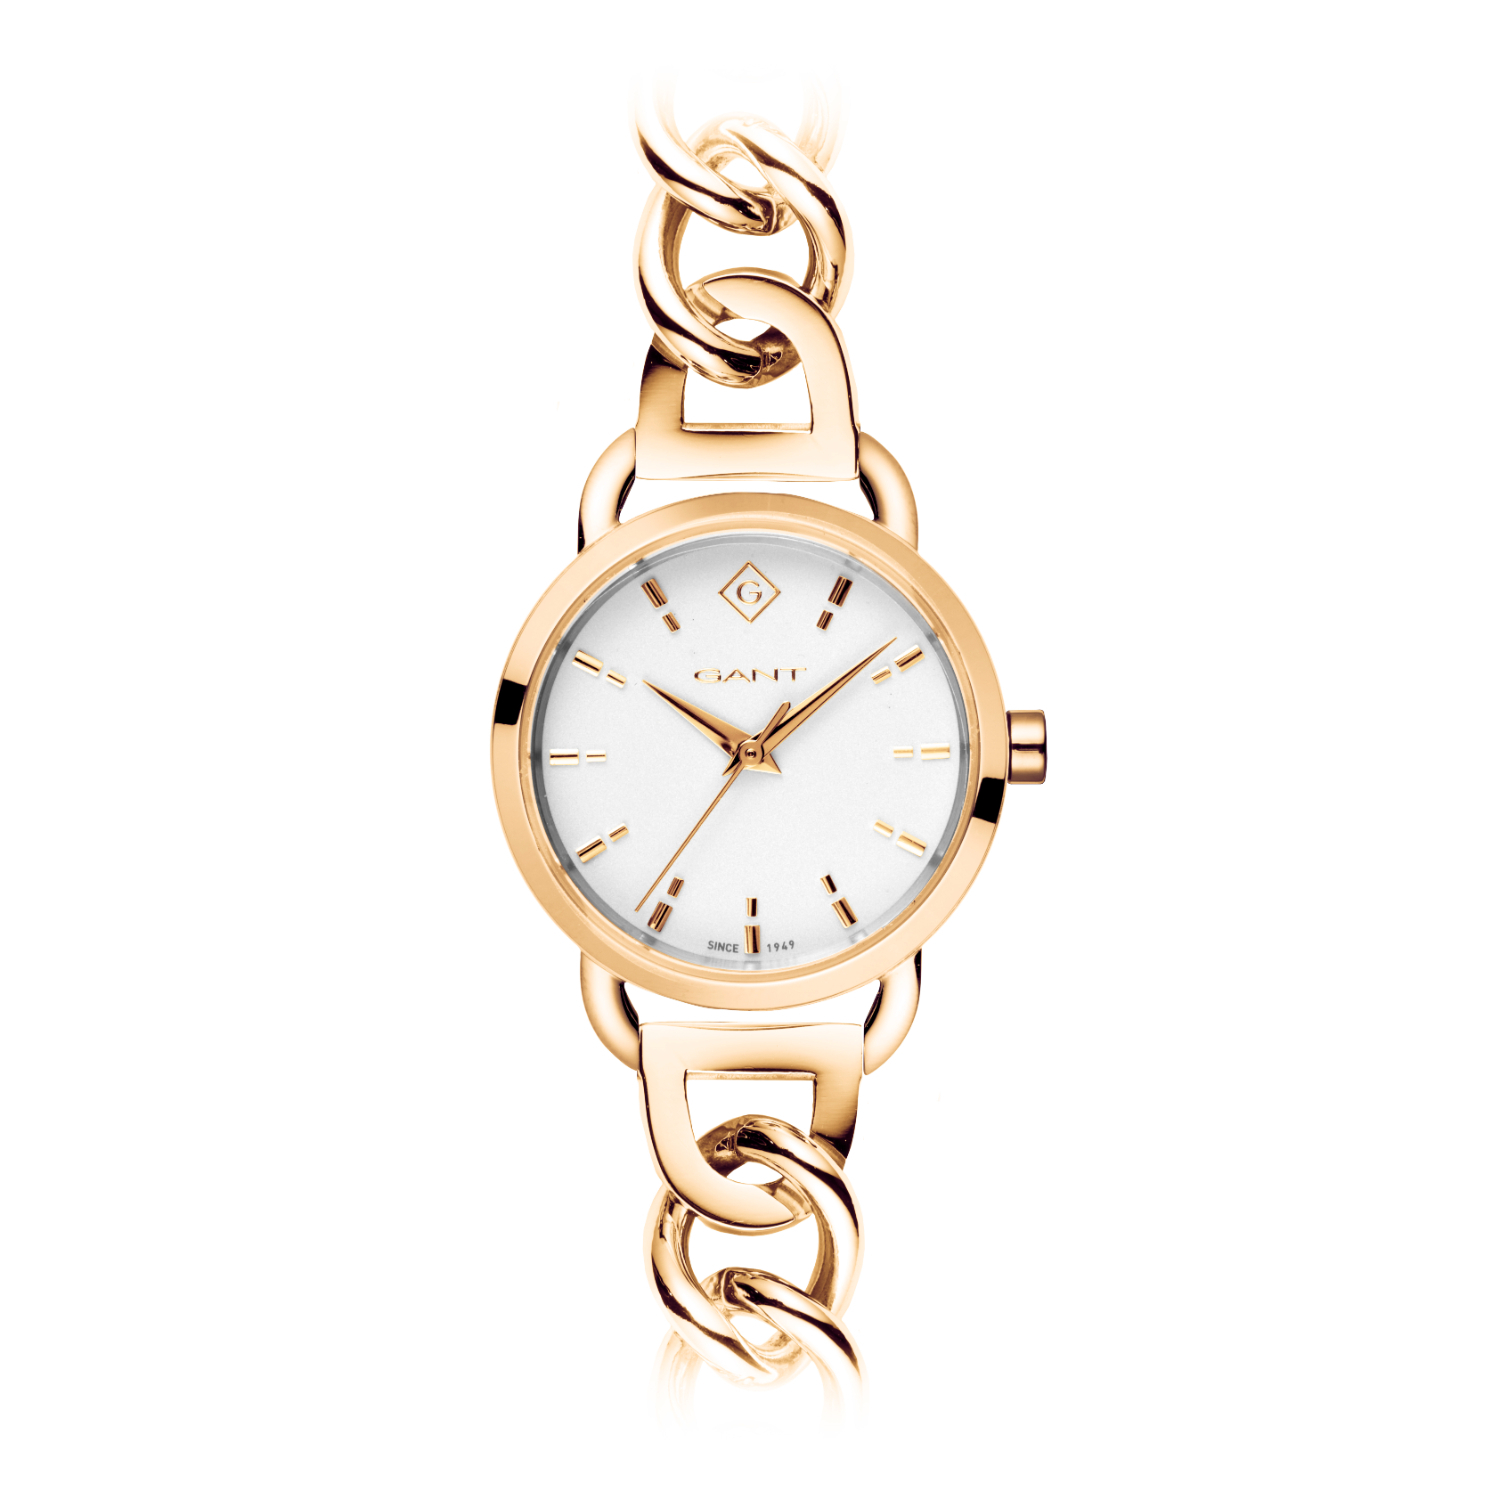 GANT womens watch in gold stainless steel with white dial and bracelet.